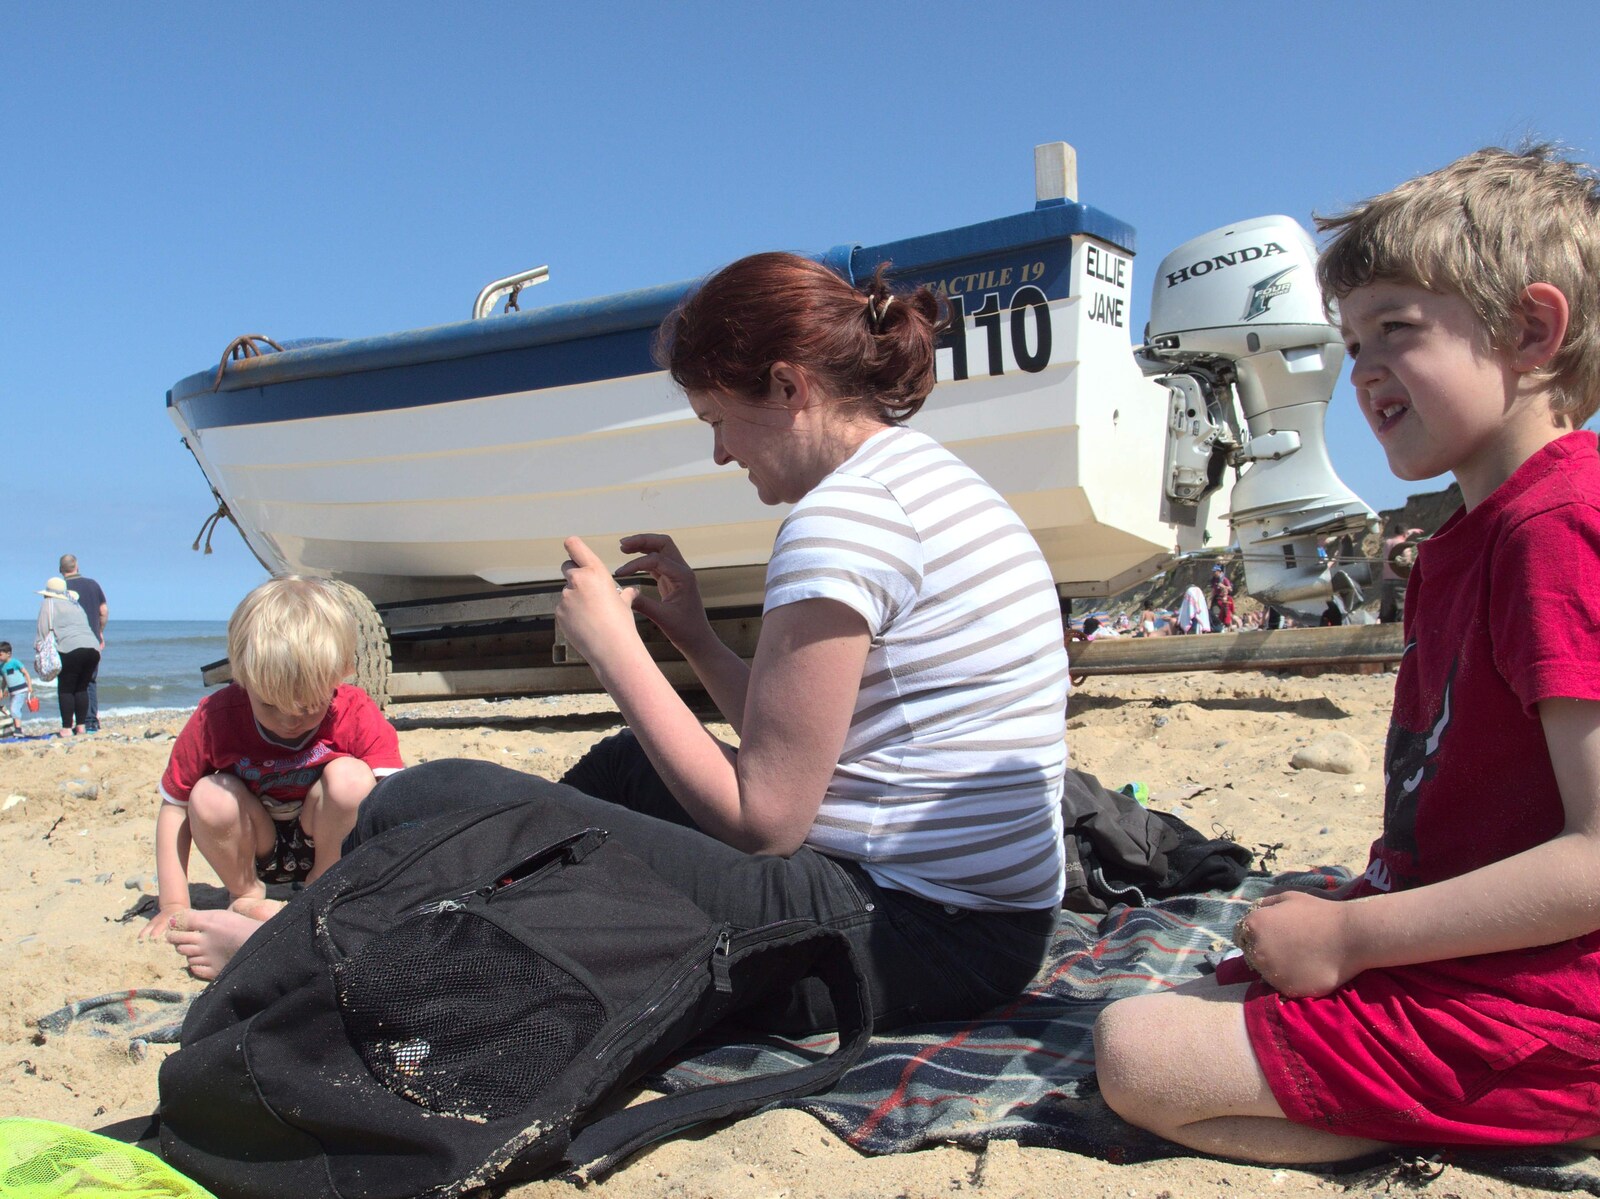 Back on the beach at East Runton from A Birthday Camping Trip, East Runton, North Norfolk - 26th May 2015